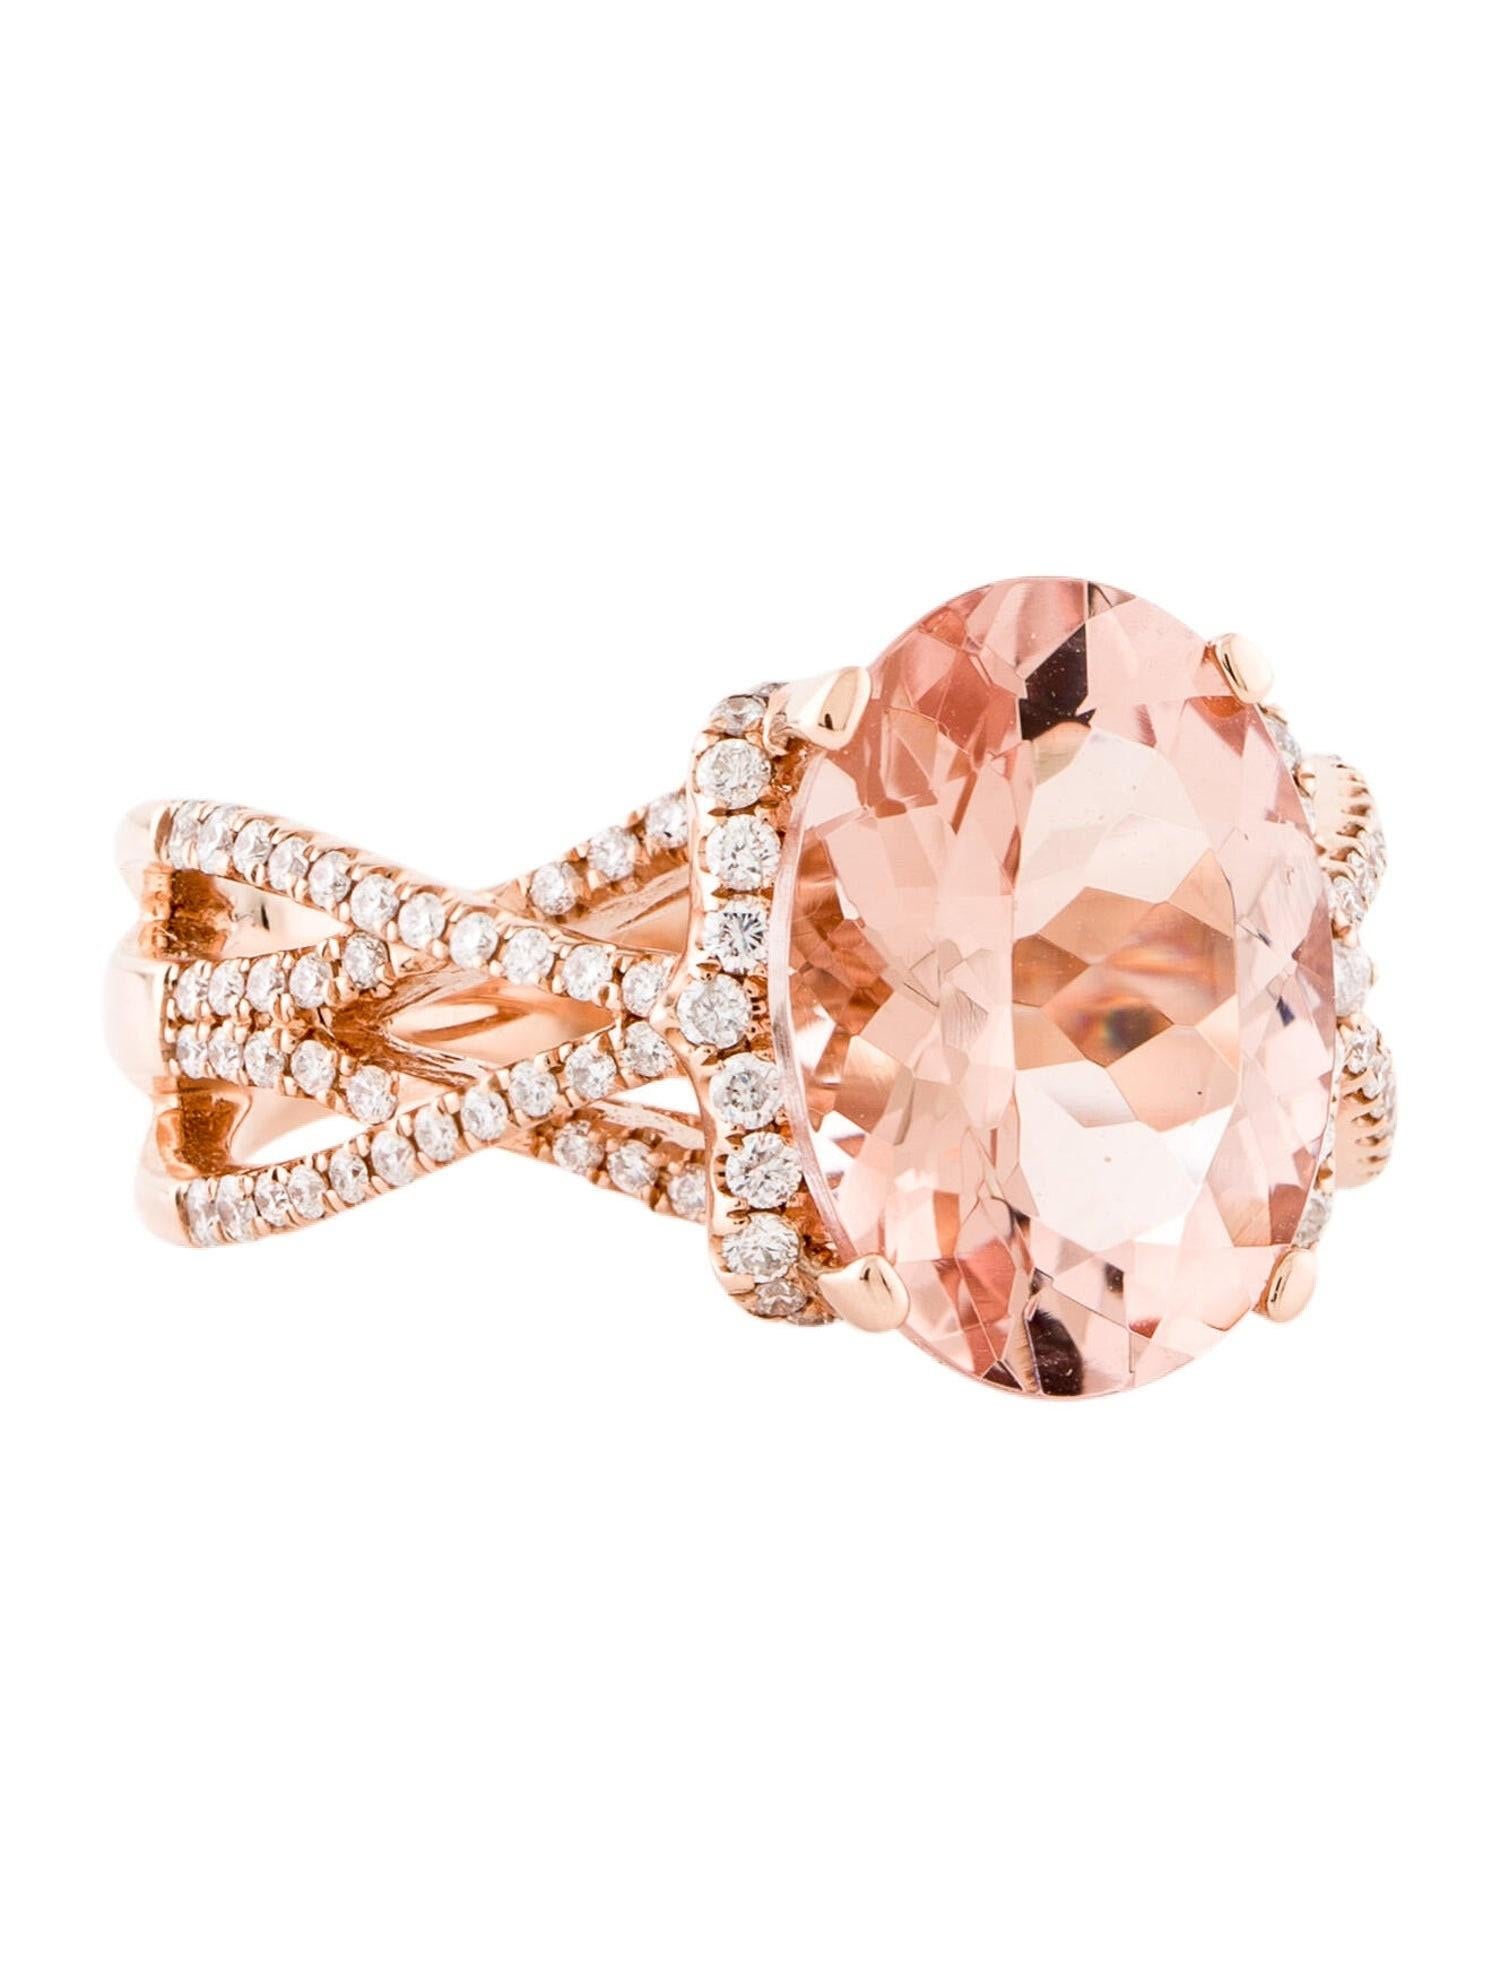 Oval Cut 5.56CT Morganite & Diamond Halo Cocktail Ring For Sale